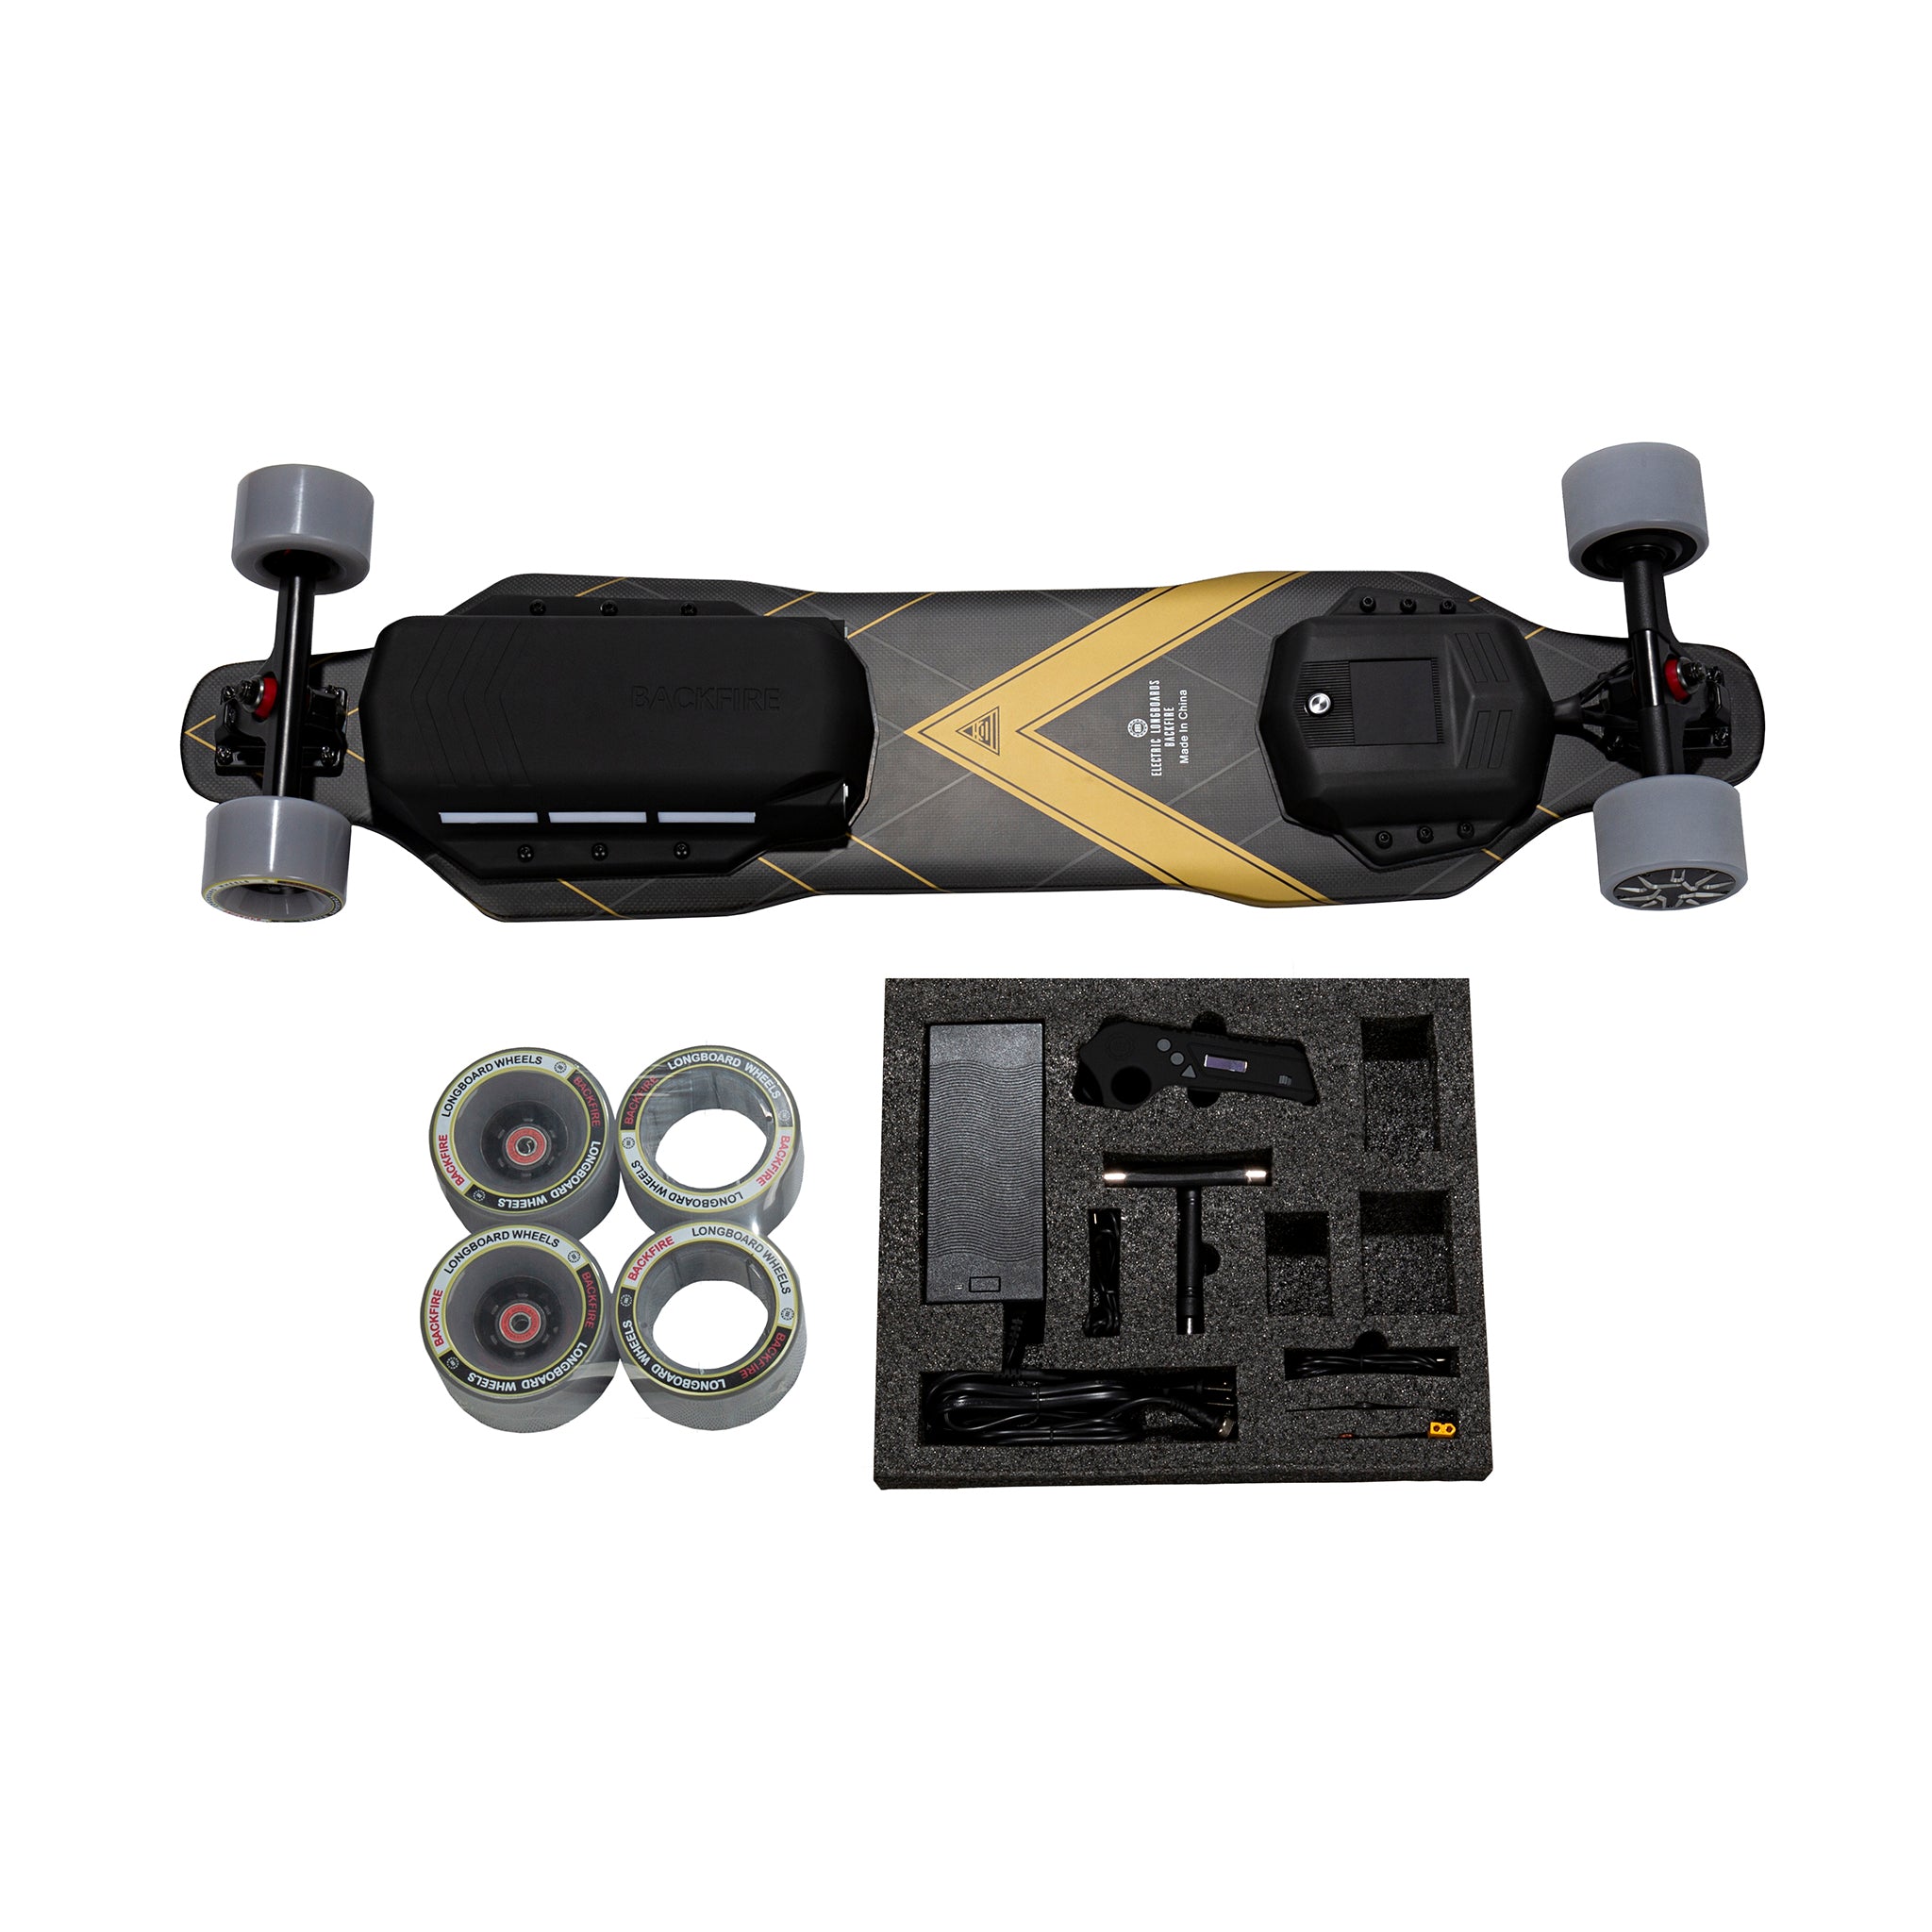 Backfire G3 Plus with Carbon Fiber Deck and Ultra Long Range